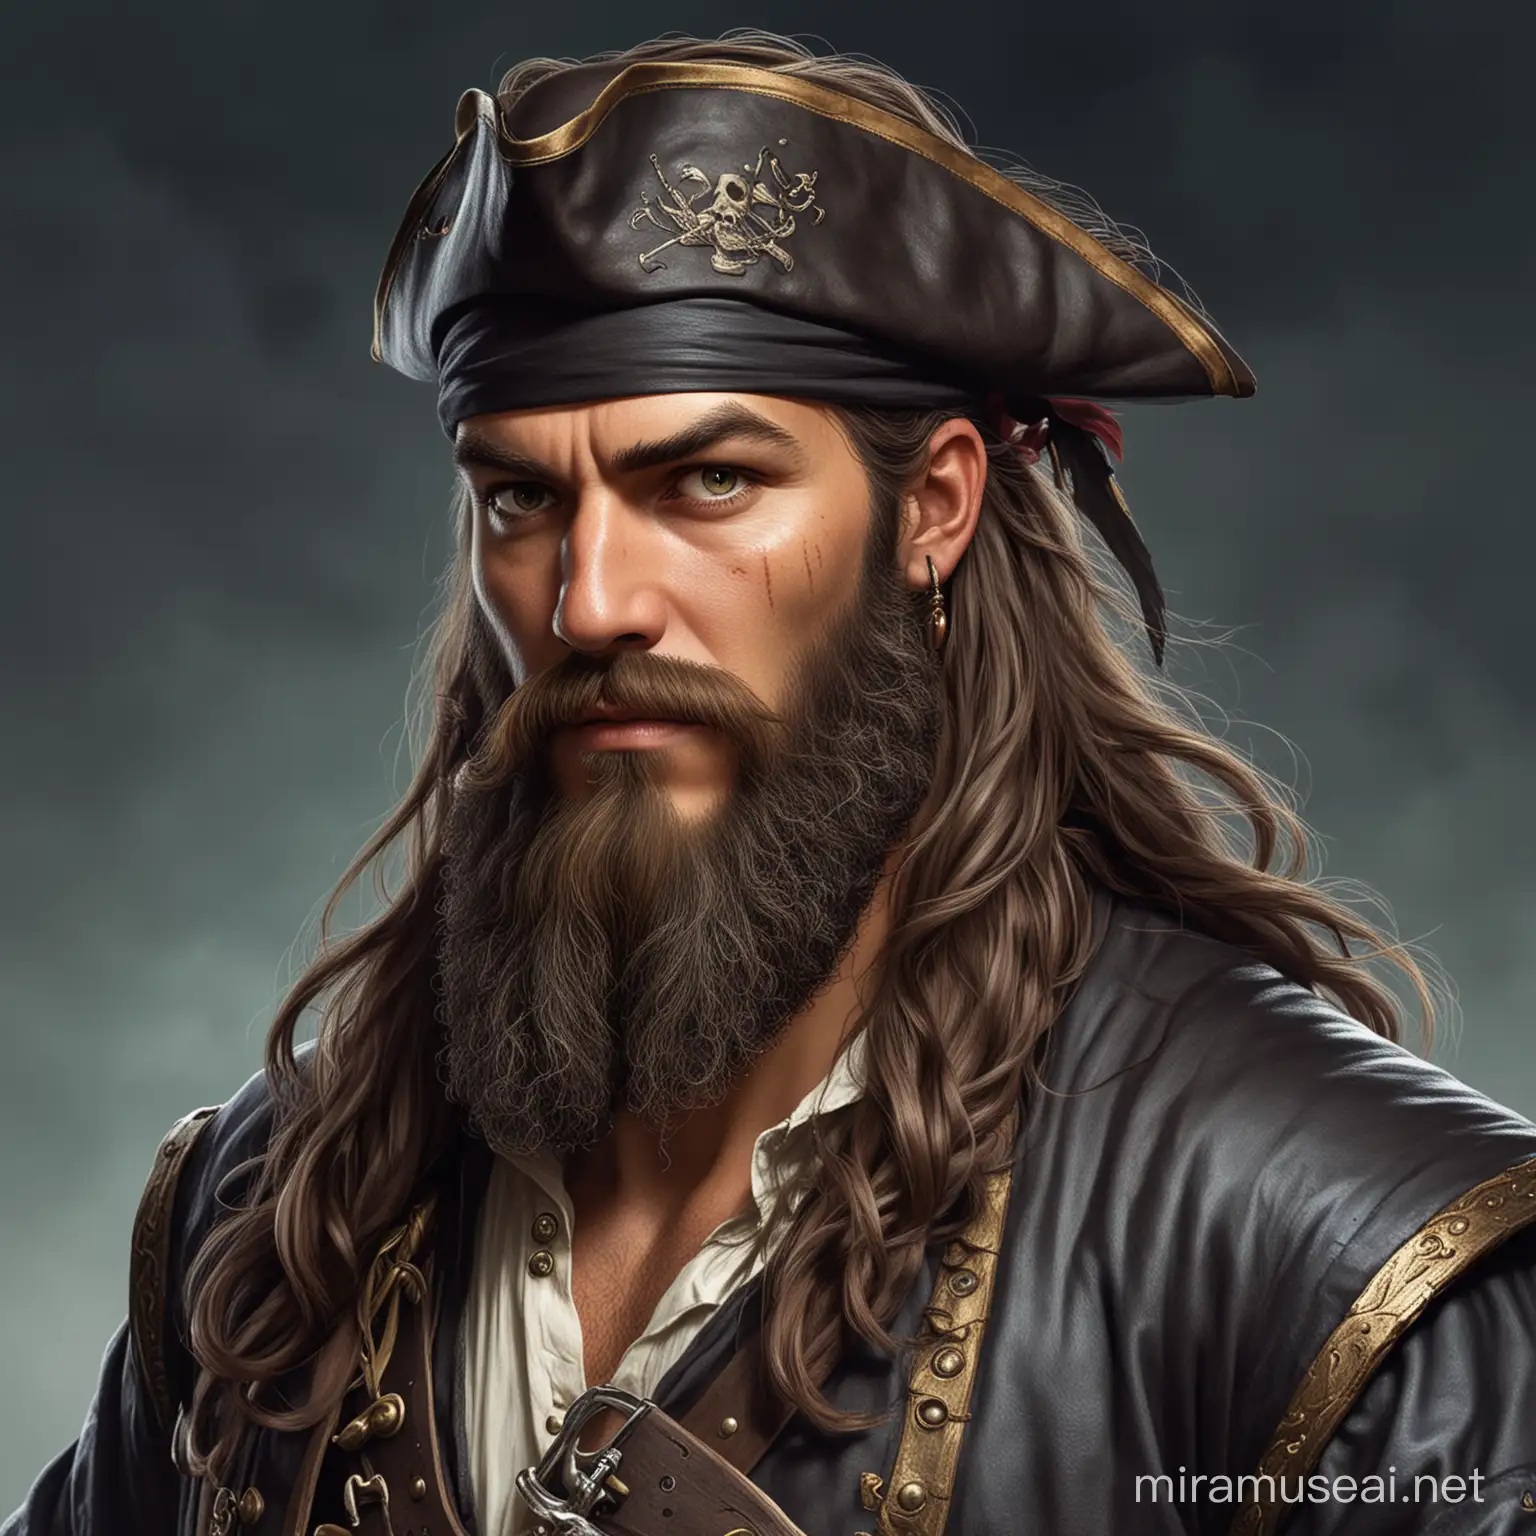 Charismatic Pirate with Flowing Hair and Voluminous Beard